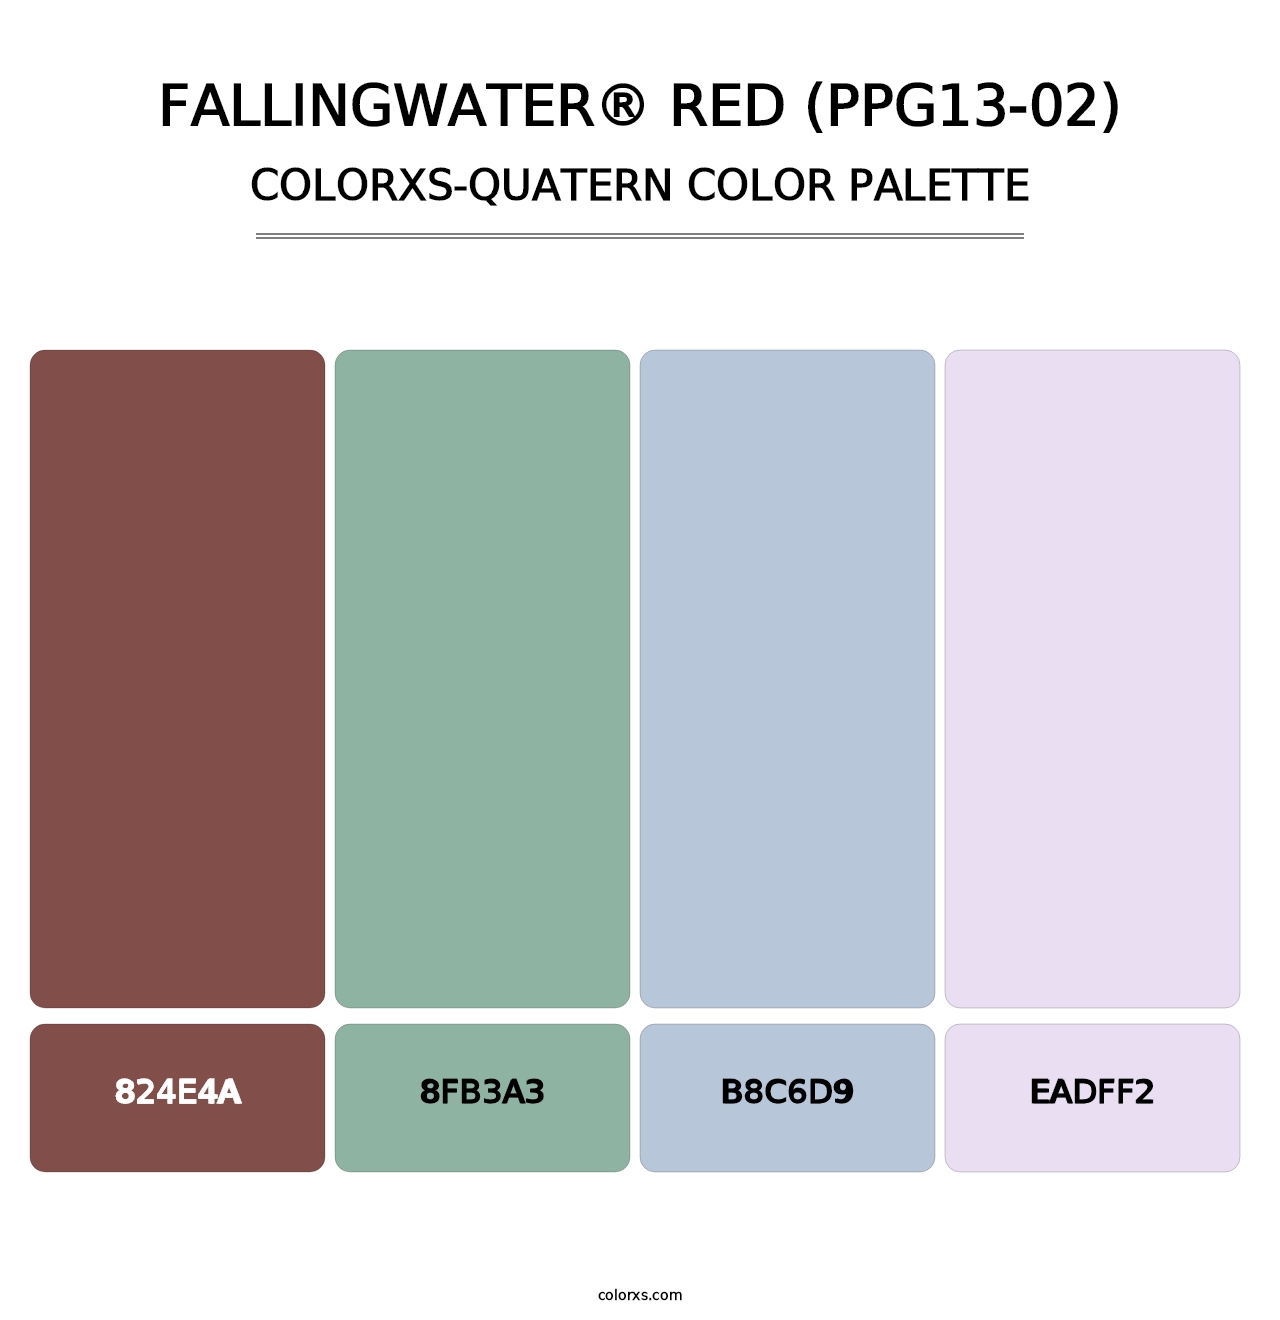 Fallingwater® Red (PPG13-02) - Colorxs Quatern Palette